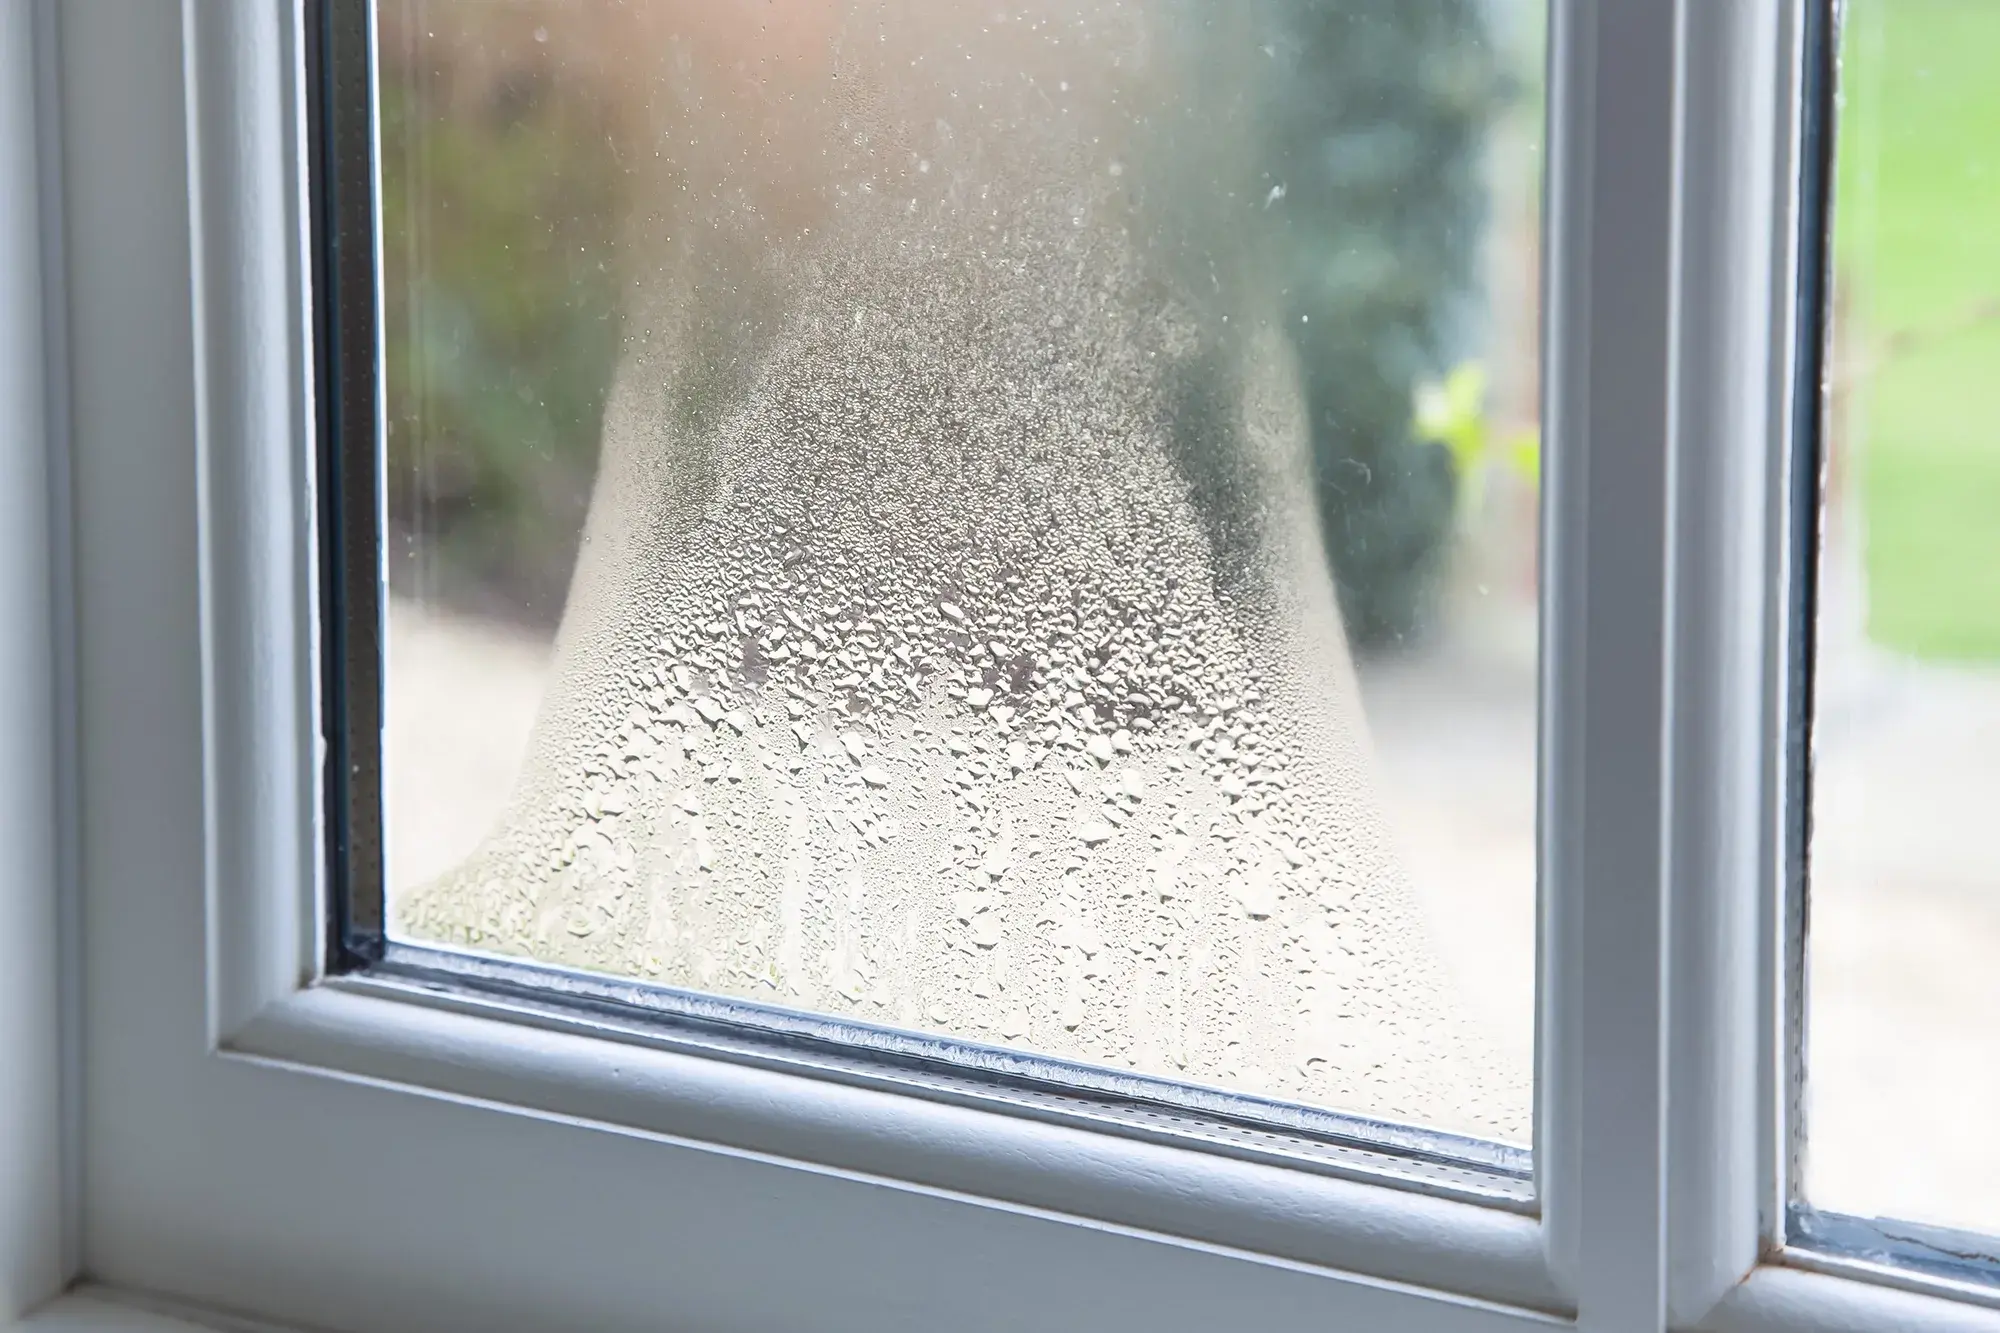 Condensation is stopped from damaging your home